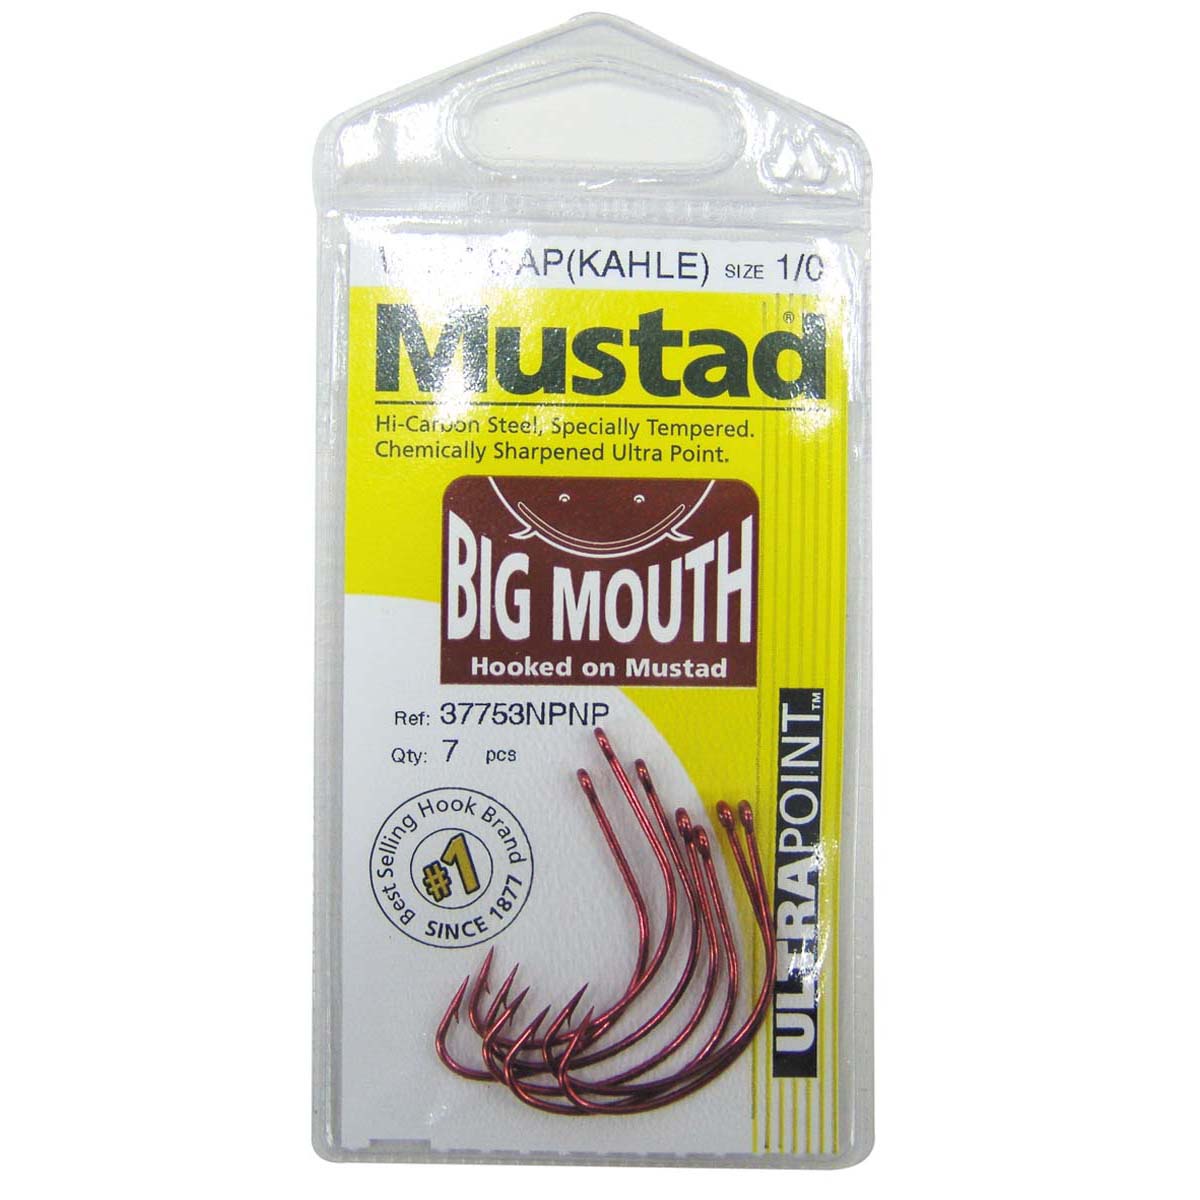 Mustad Big Mouth Hooks 2 8 Pack